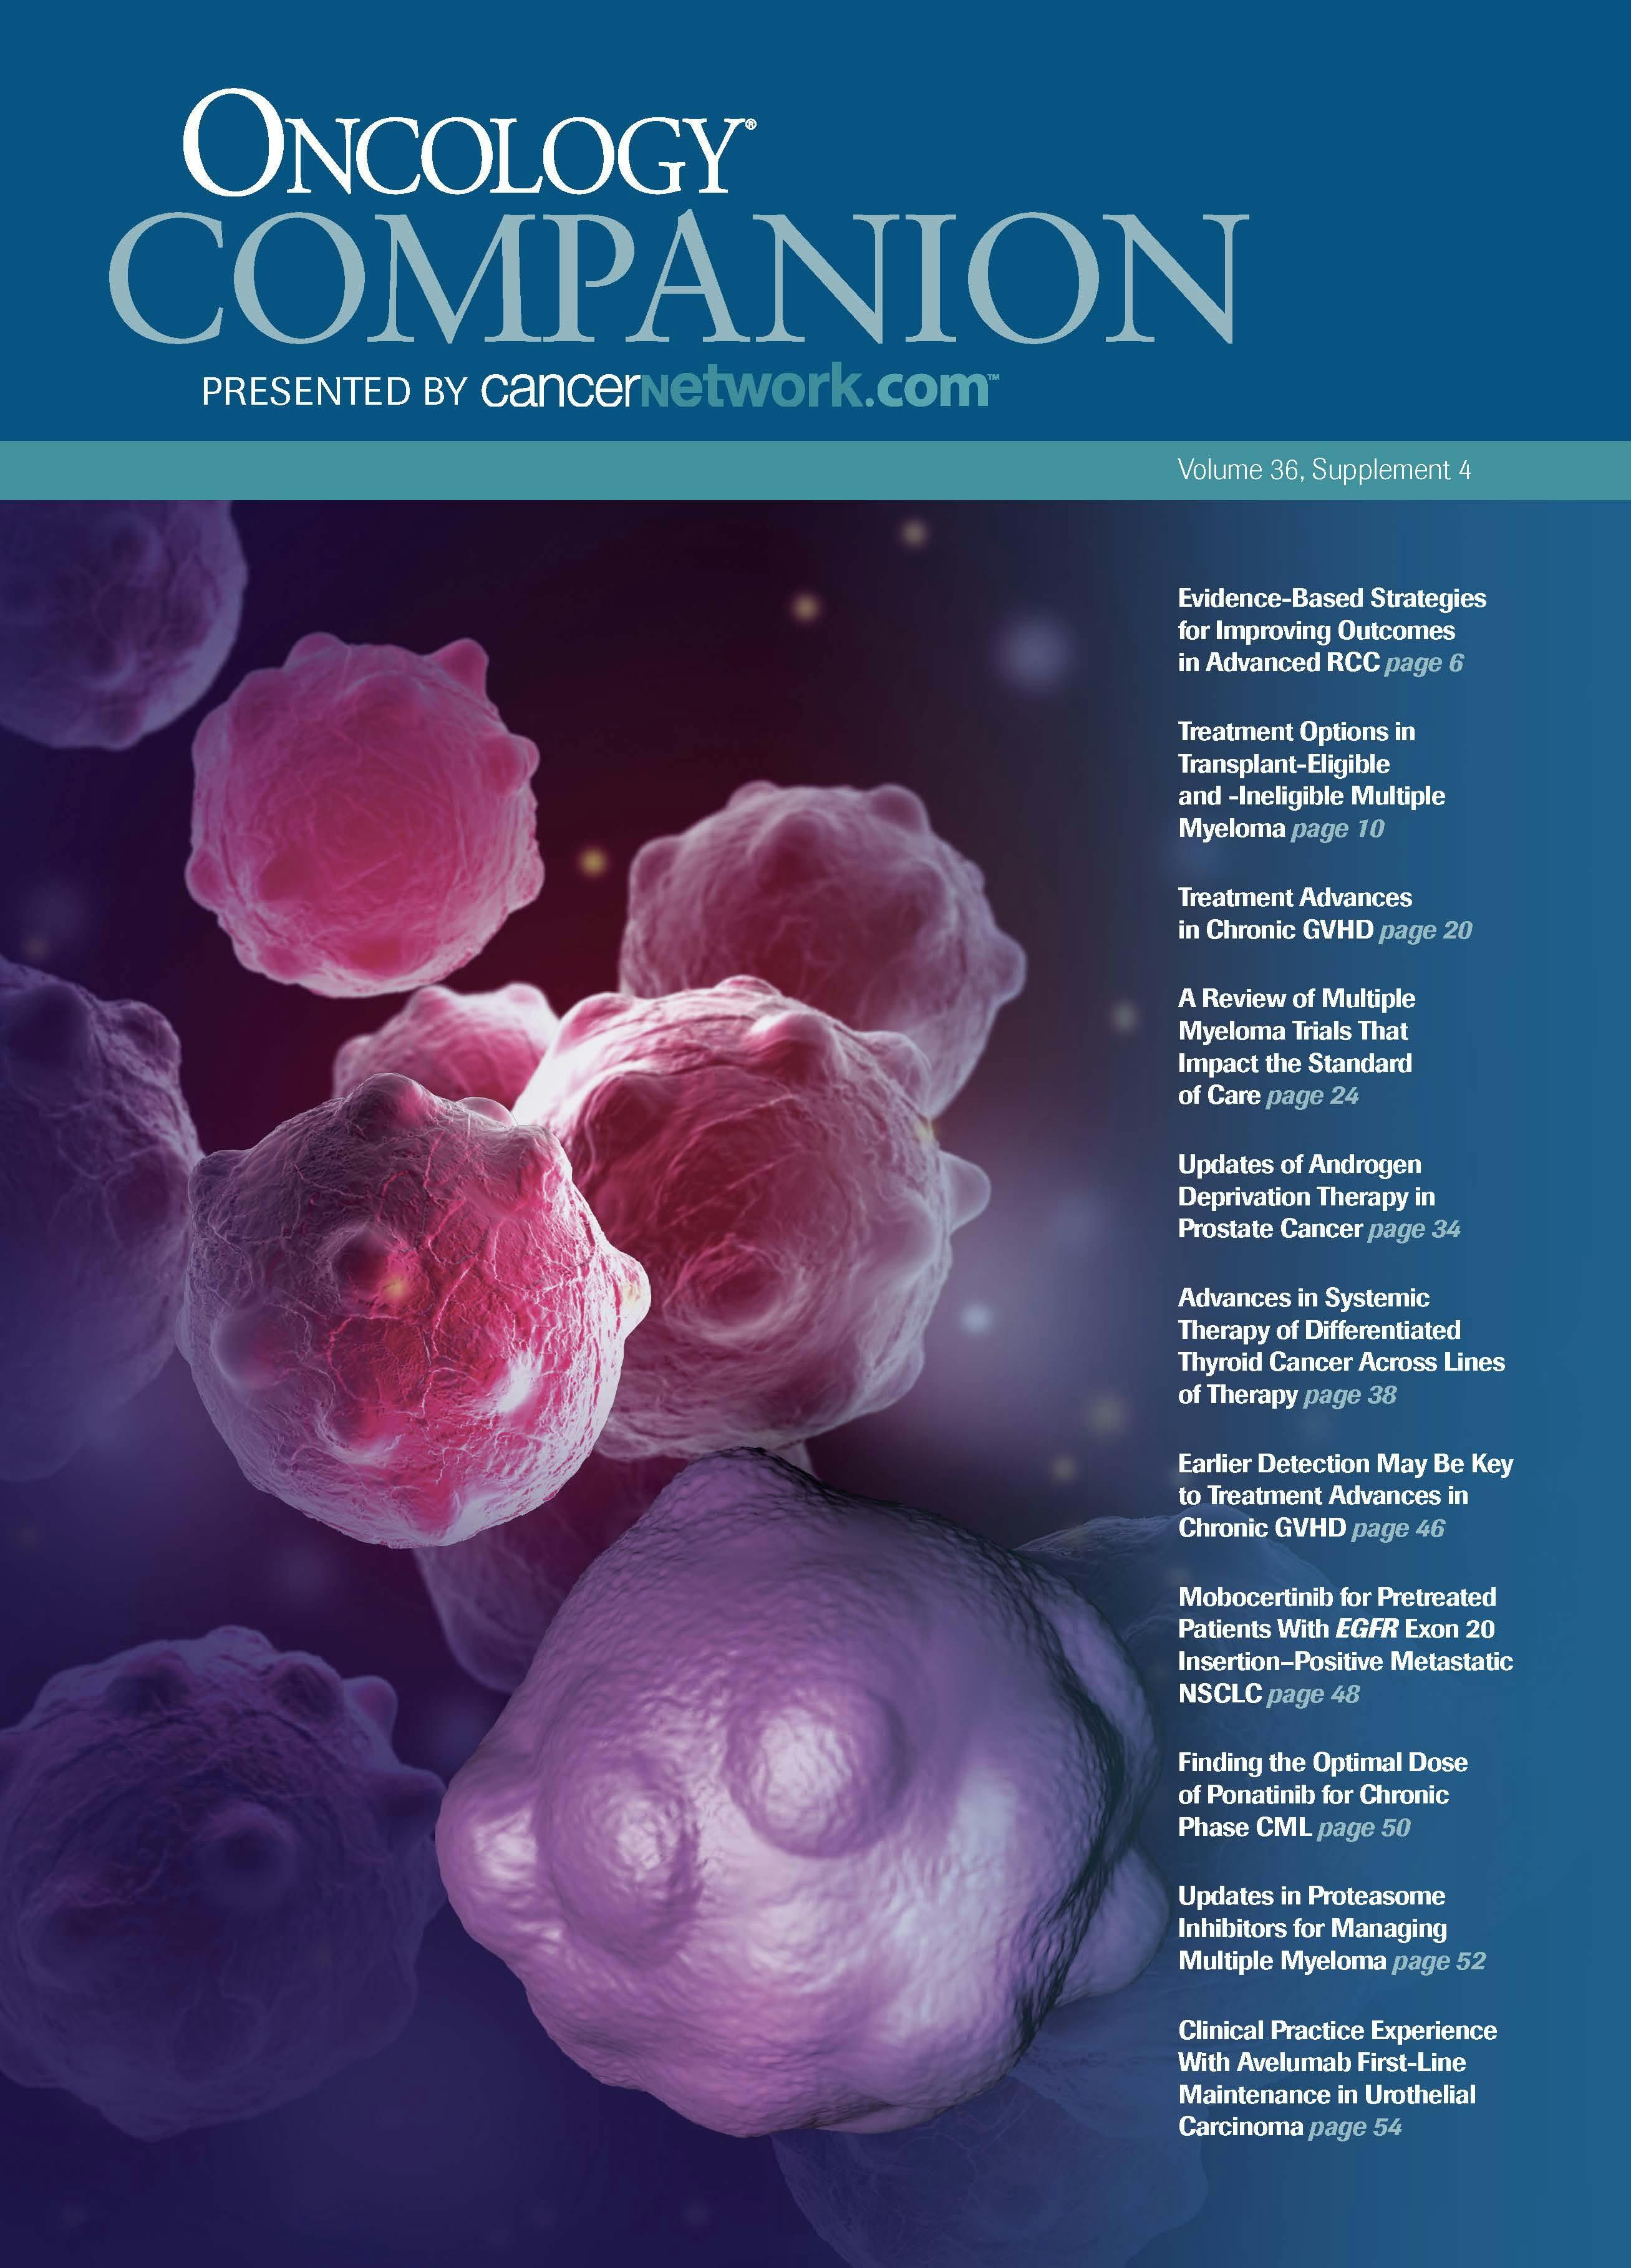 ONCOLOGY® Companion, Volume 36, Supplement 4